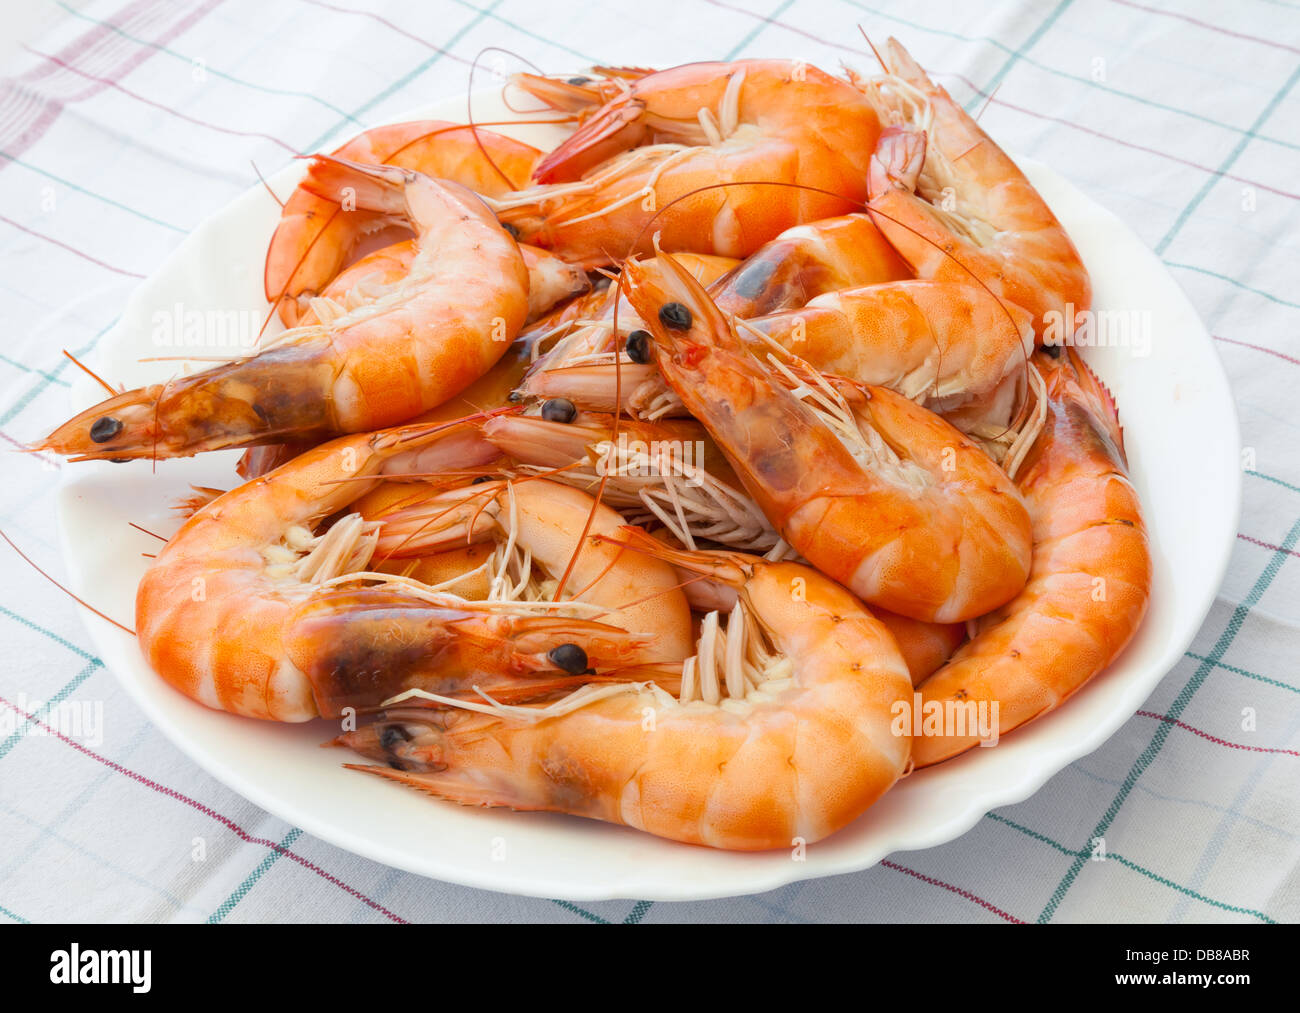 Pile of prepared shrimps lays on the plate Stock Photo